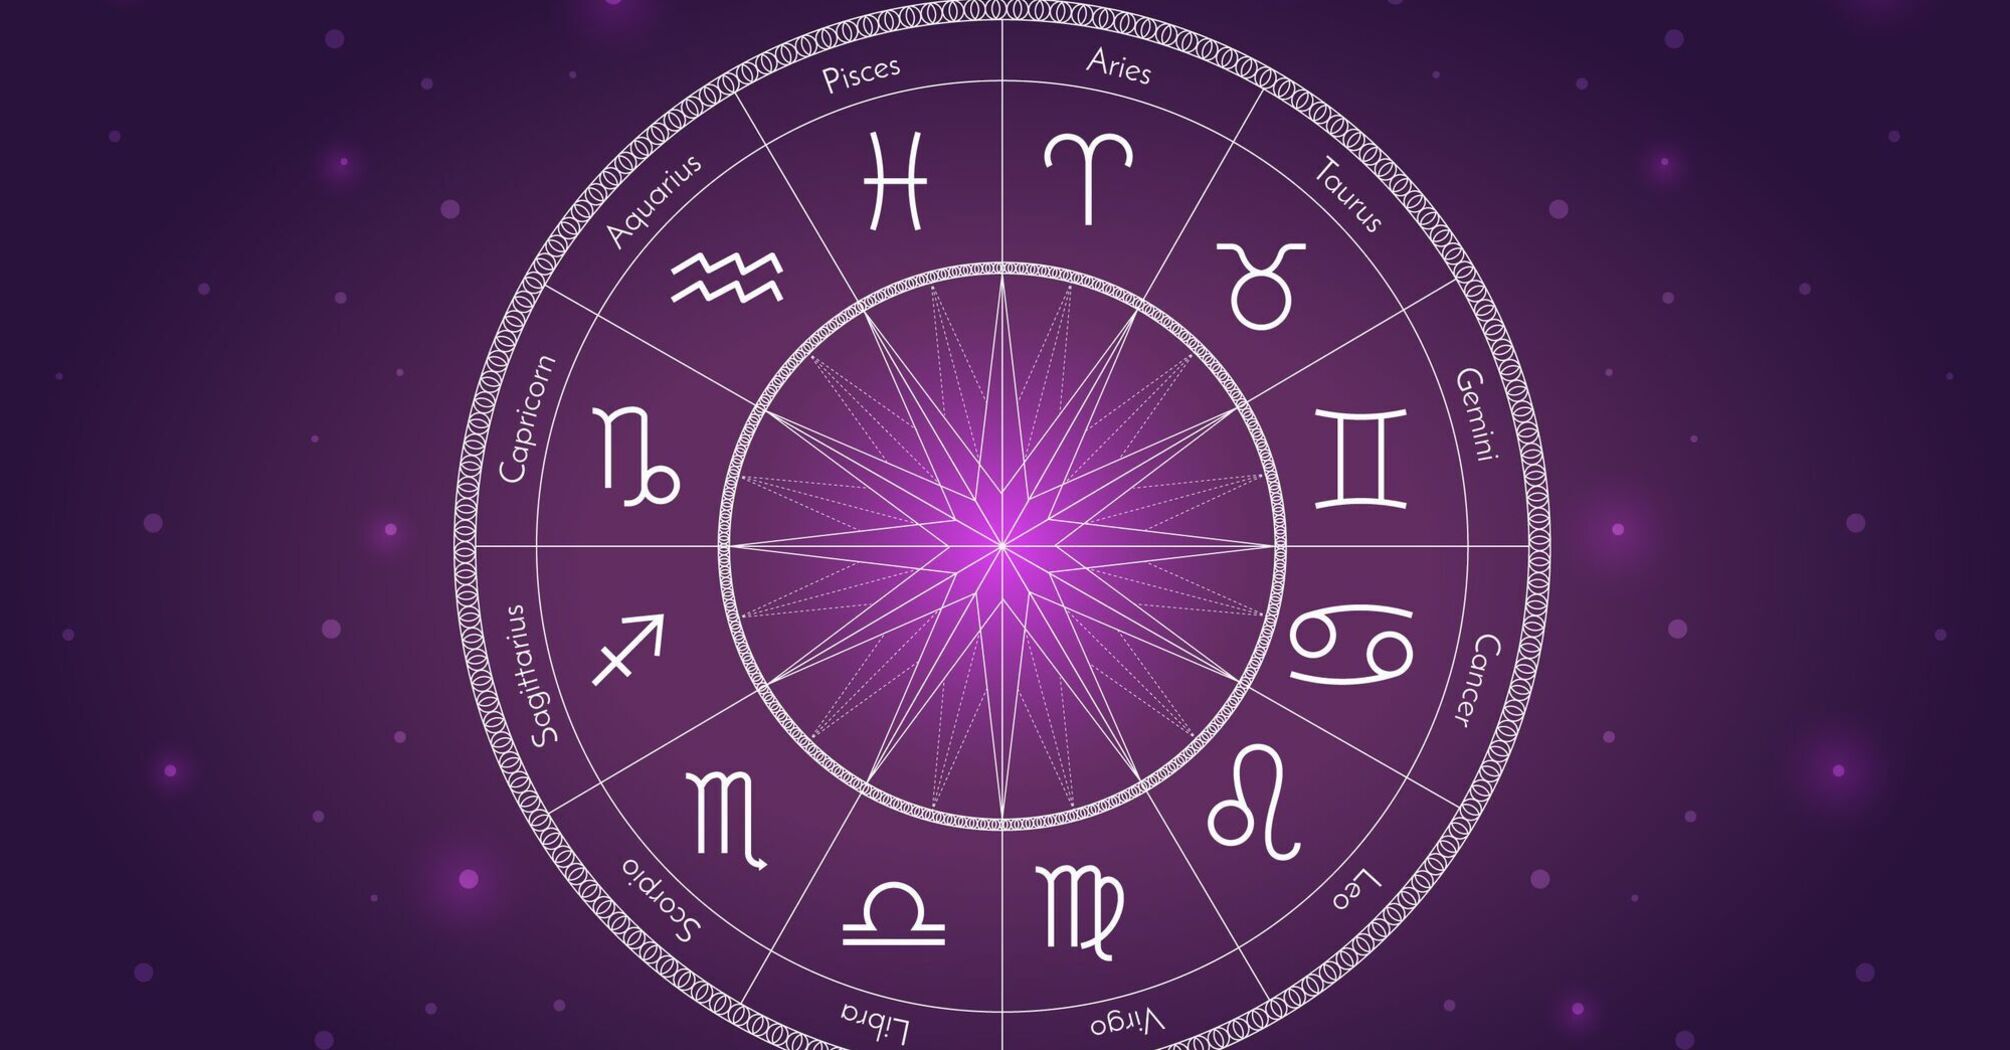 These zodiac signs can expect success at work until the end of the week